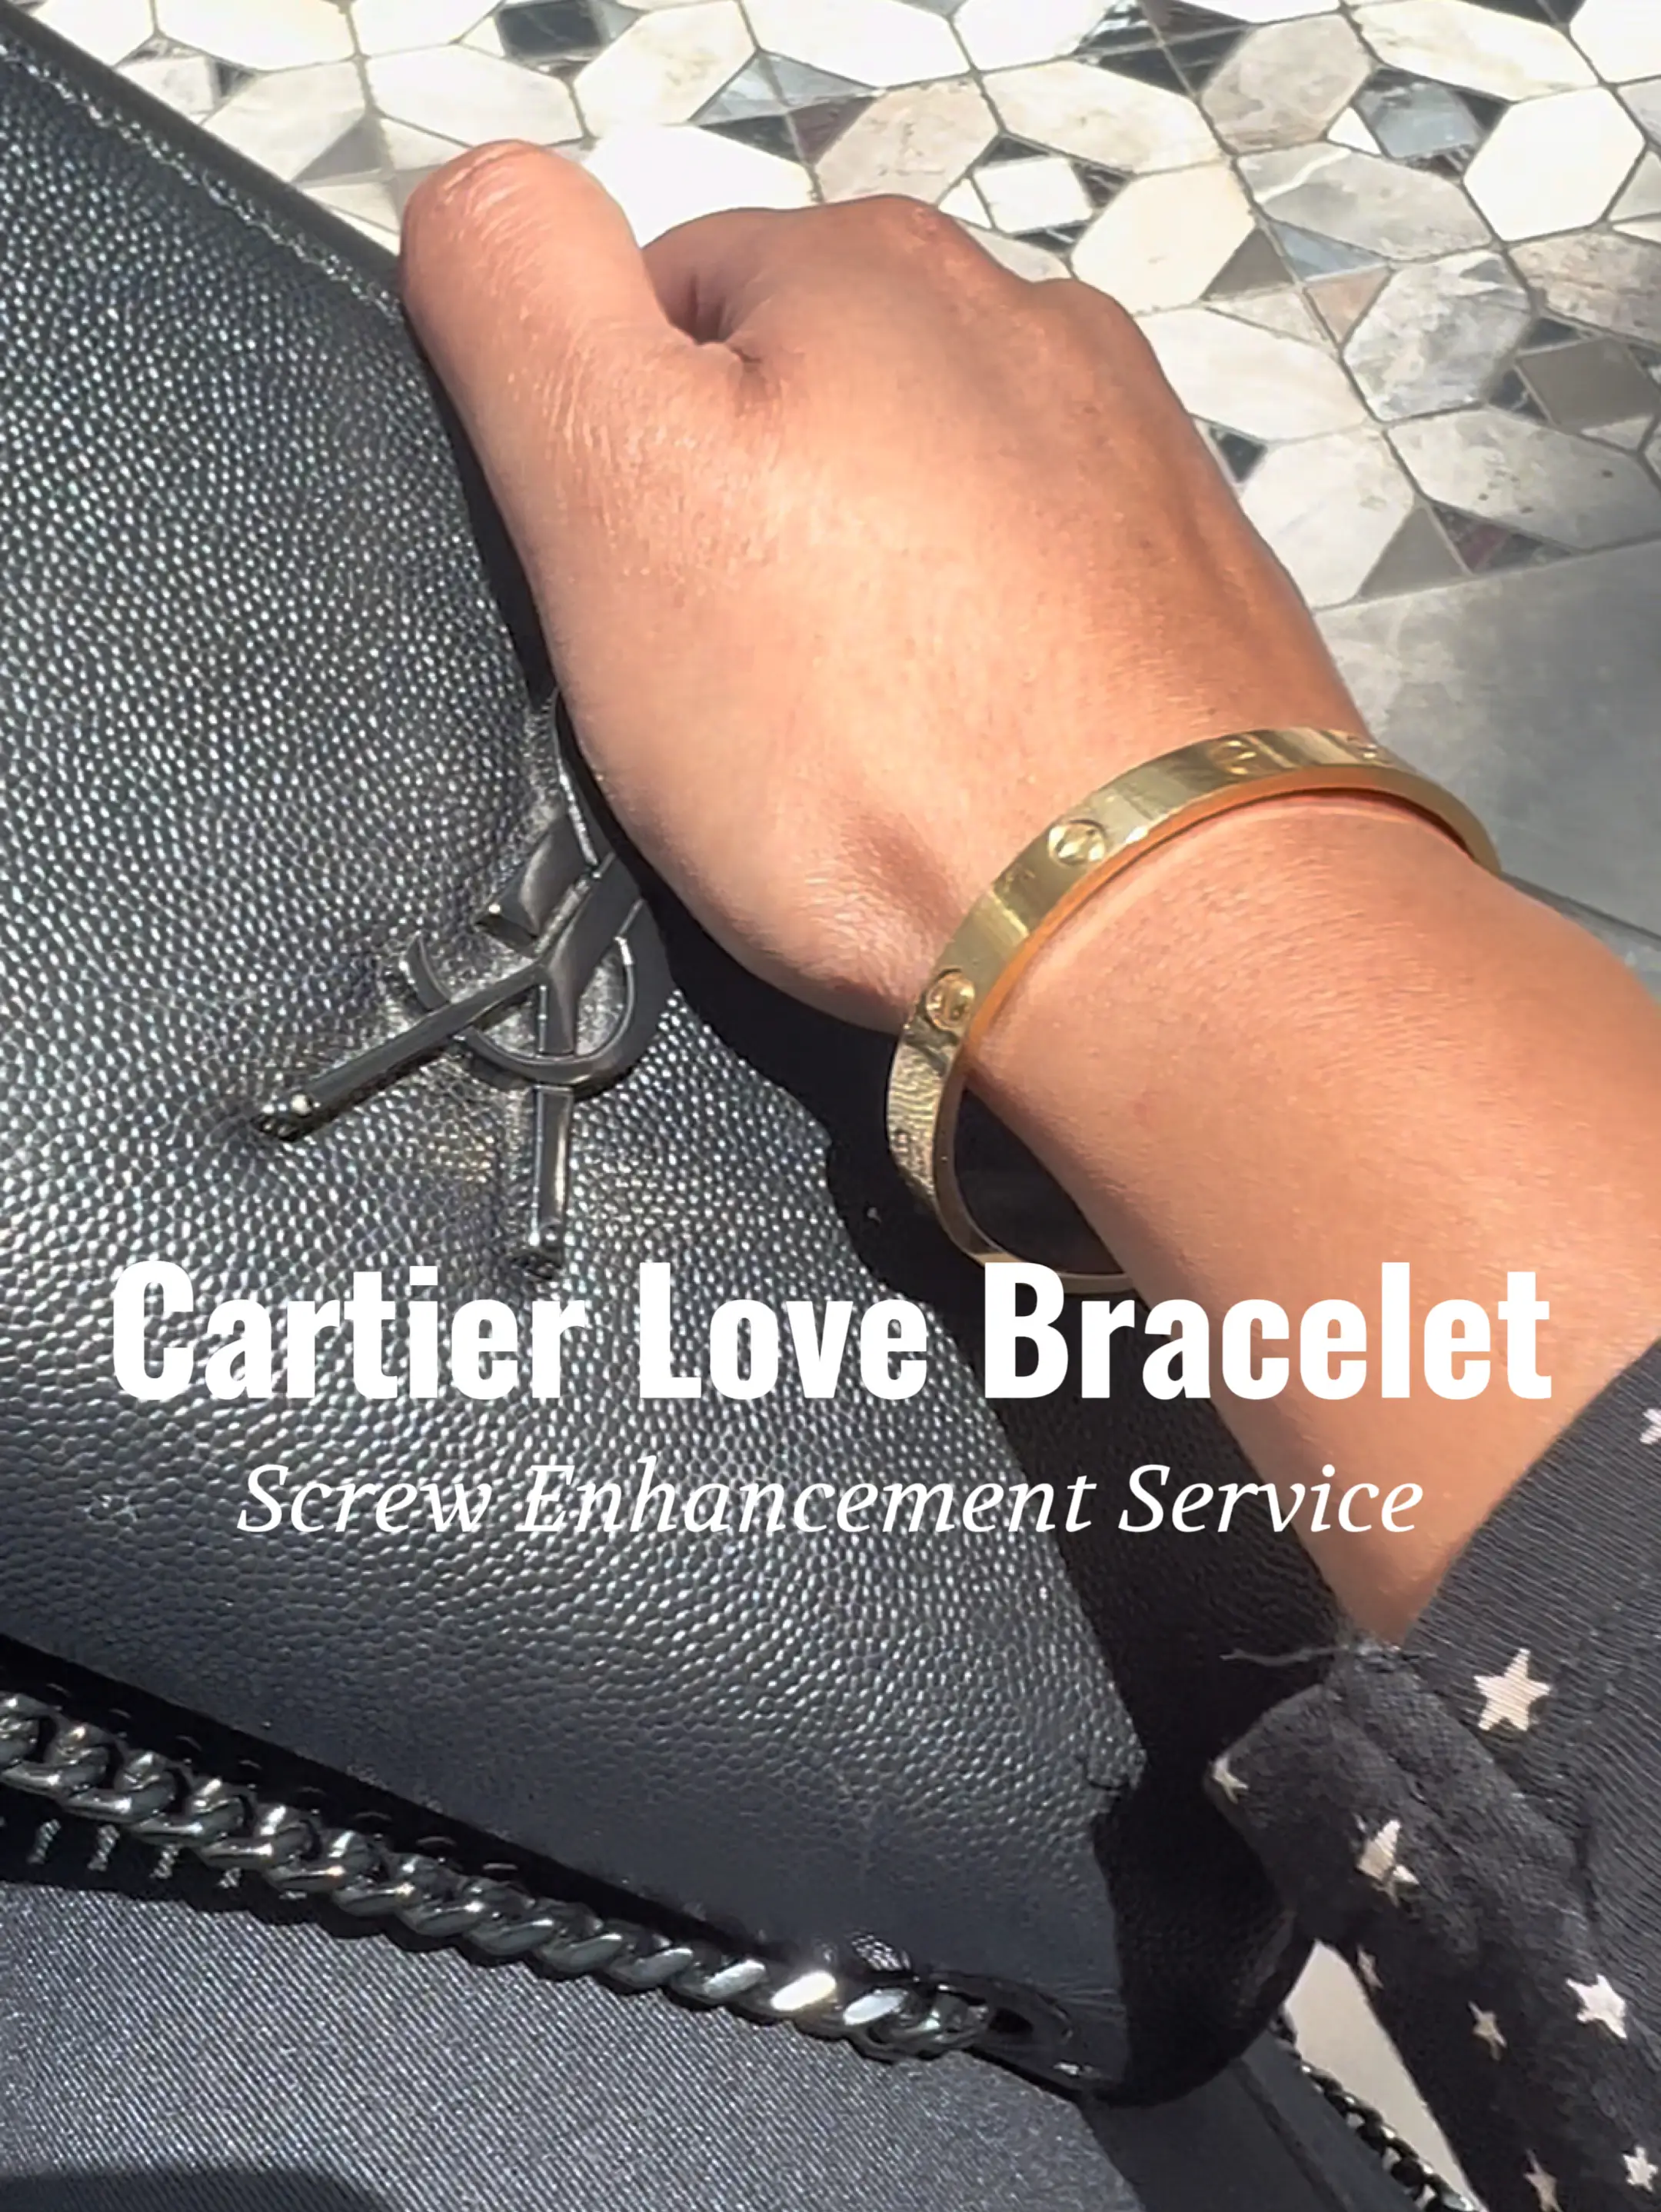 Love my Hermes & Cartier Love Bracelets all stacked to form a